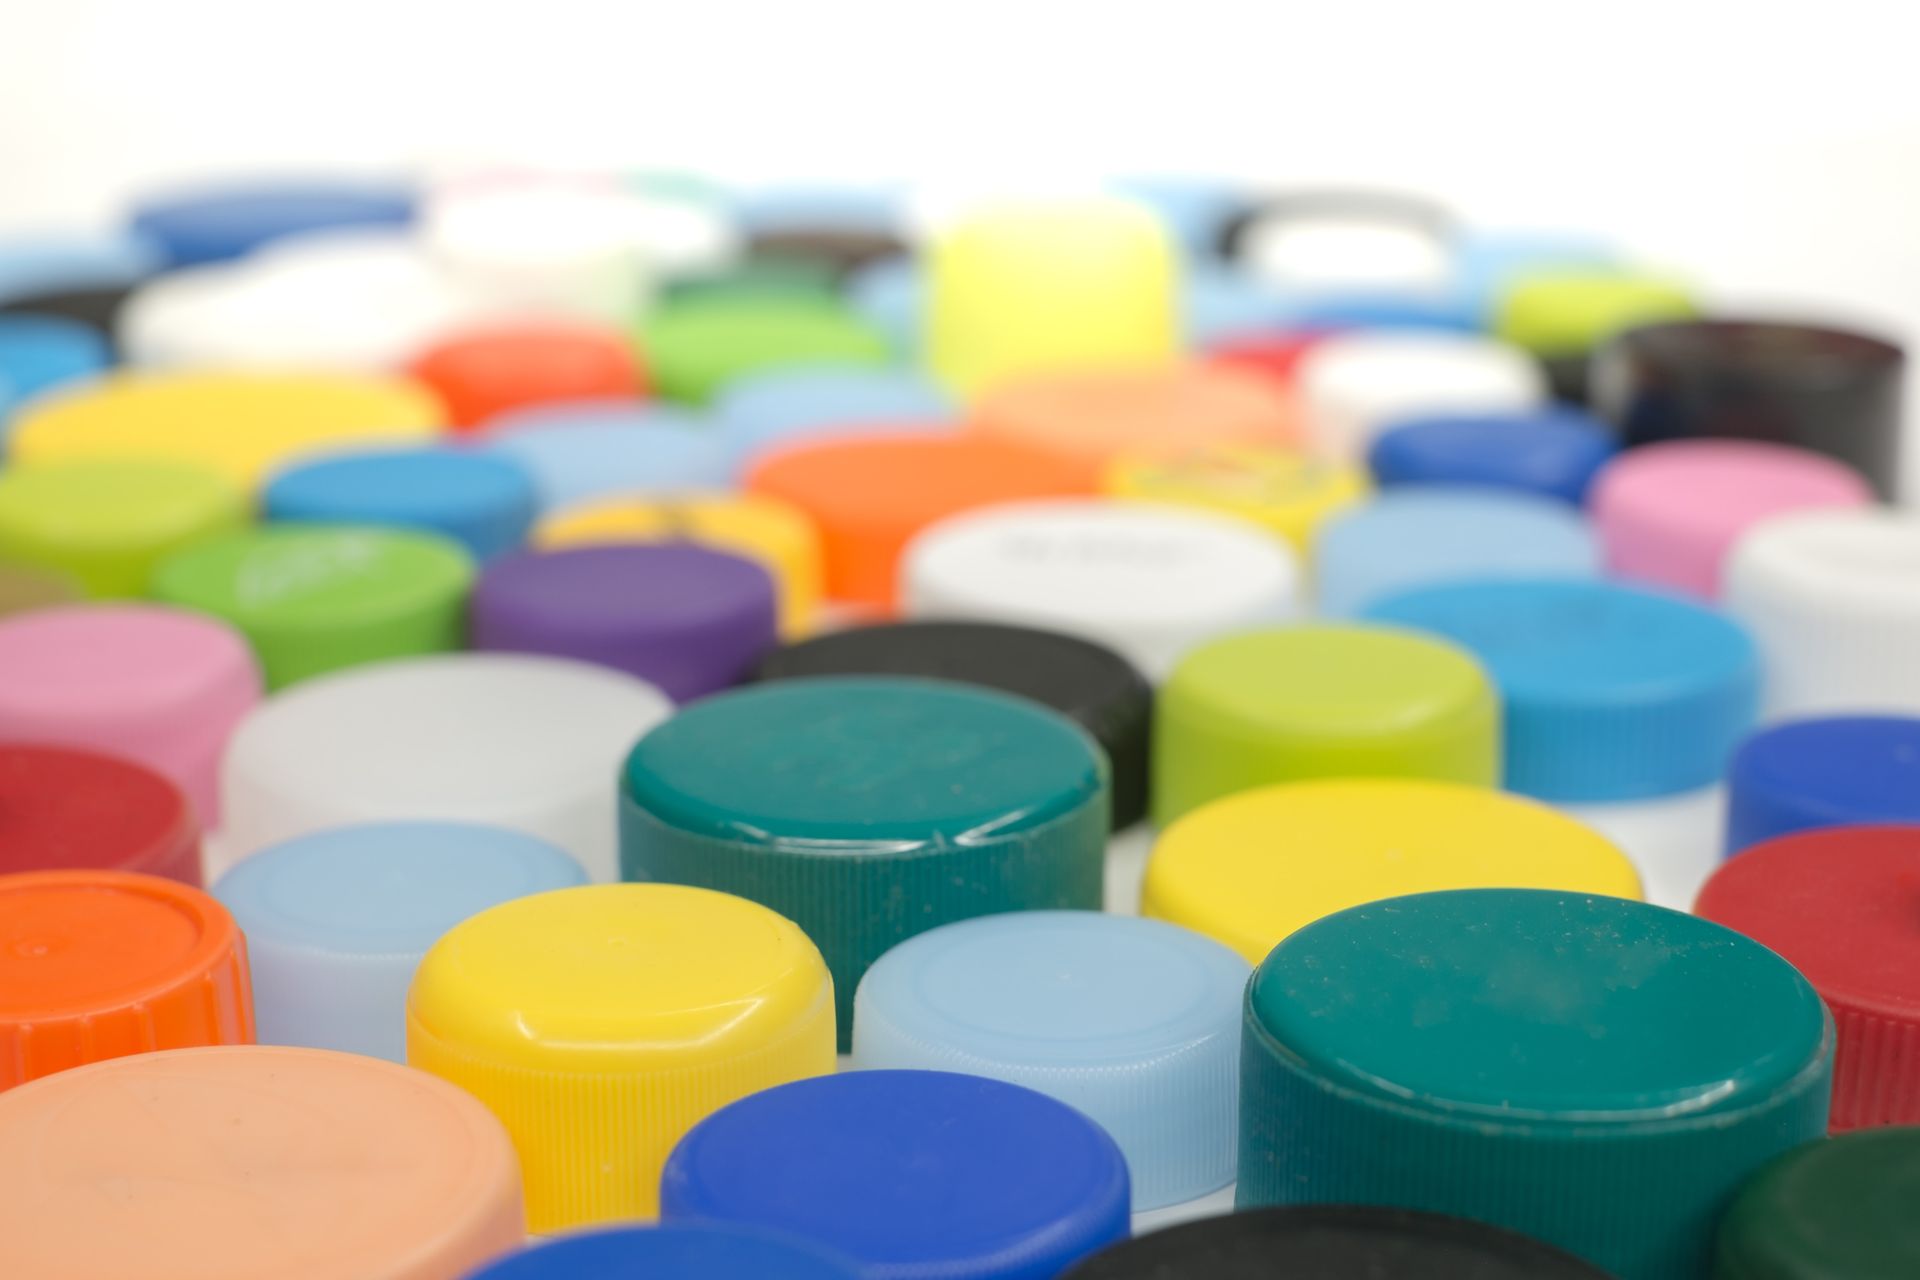 Image by Roberto Sorin showing a close-up of many different colour bottle tops